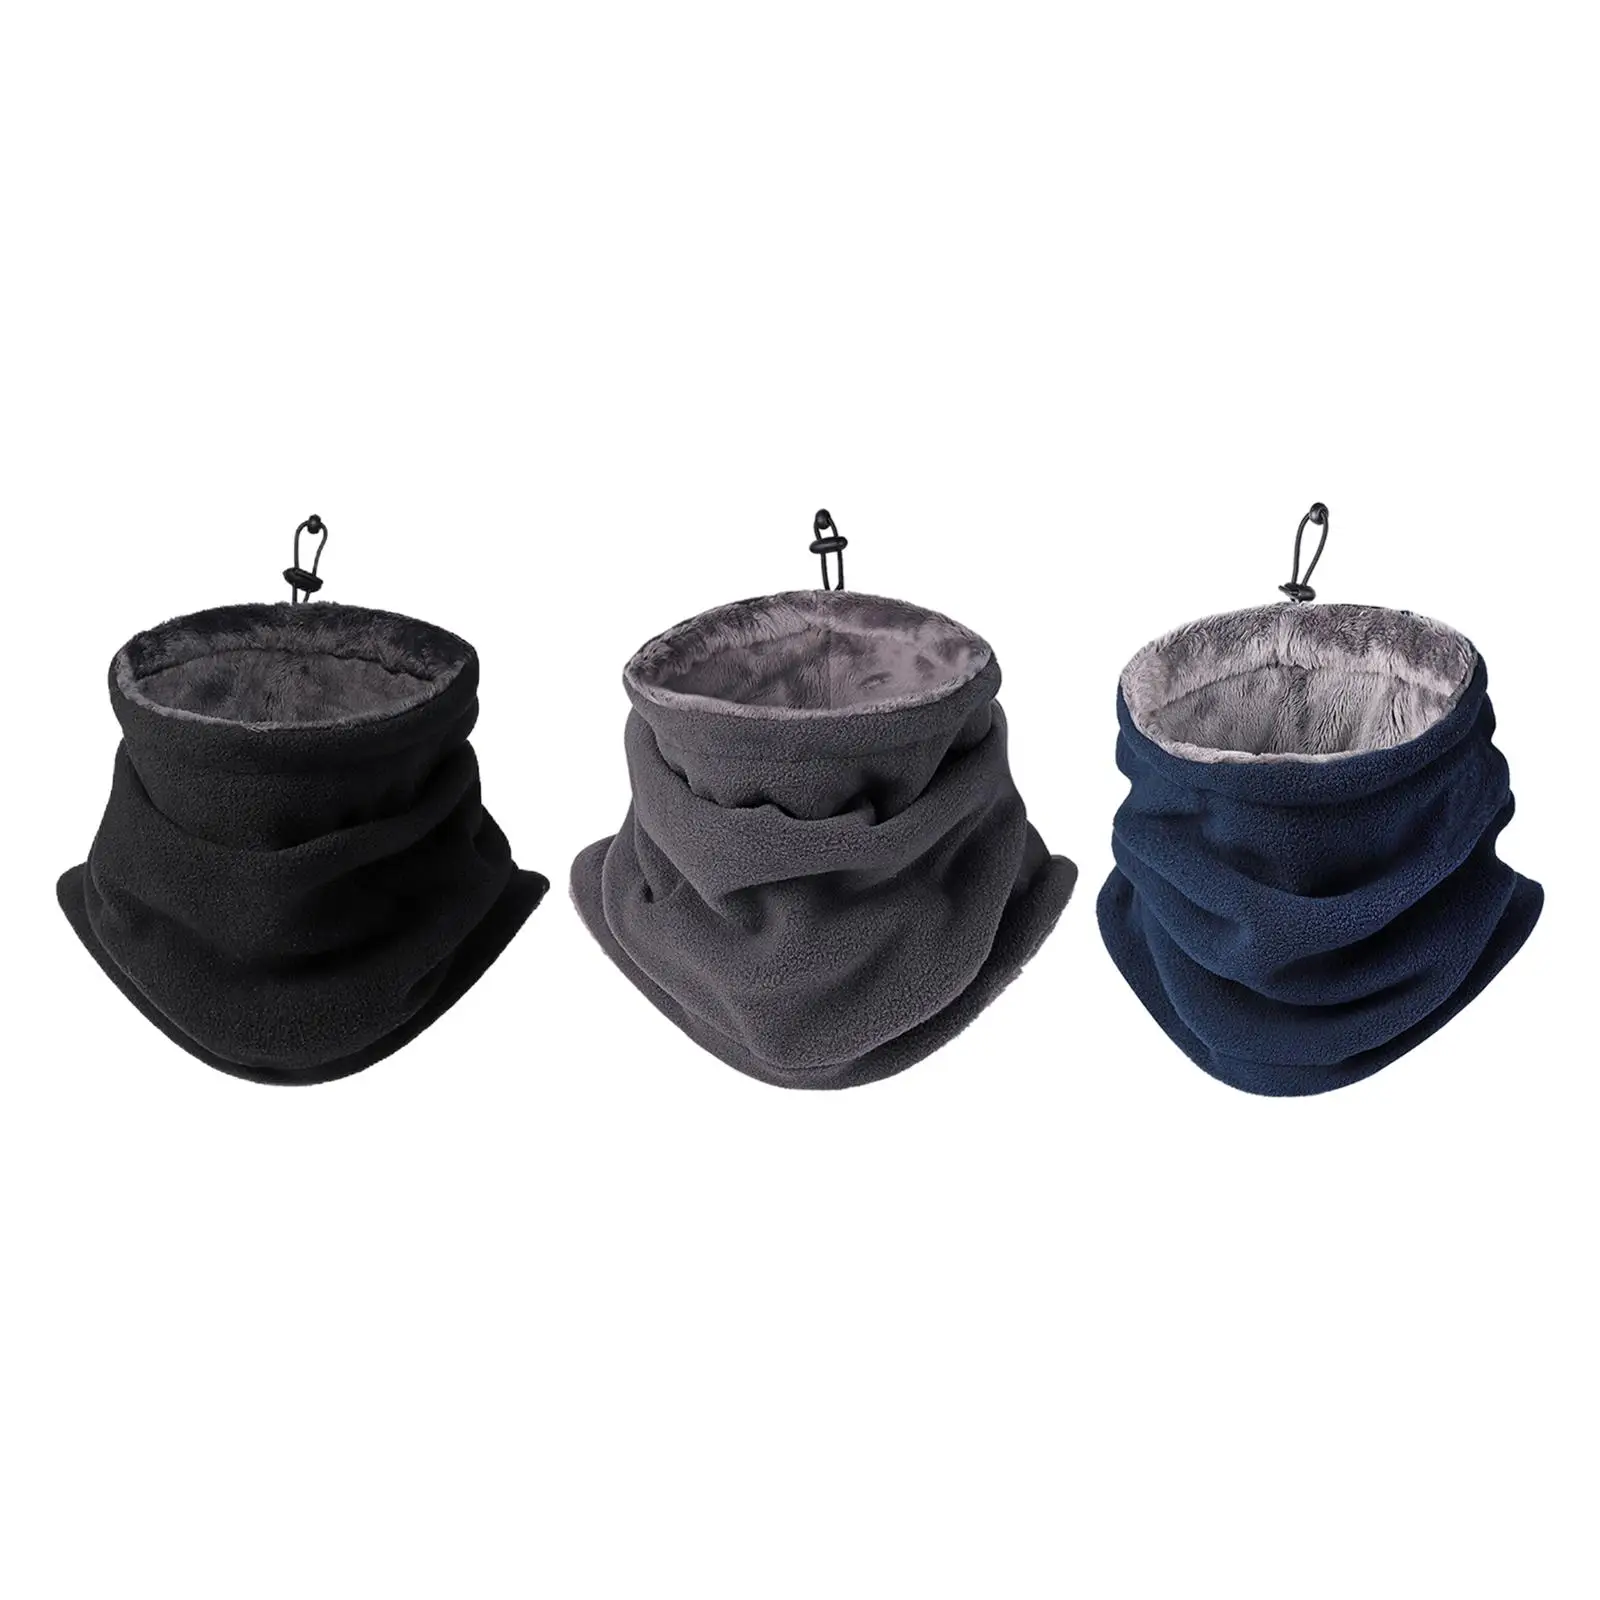 Windproof Neck Warmer Snood Tube Unisex Scarf Headwear for Running Ski Cold Weather